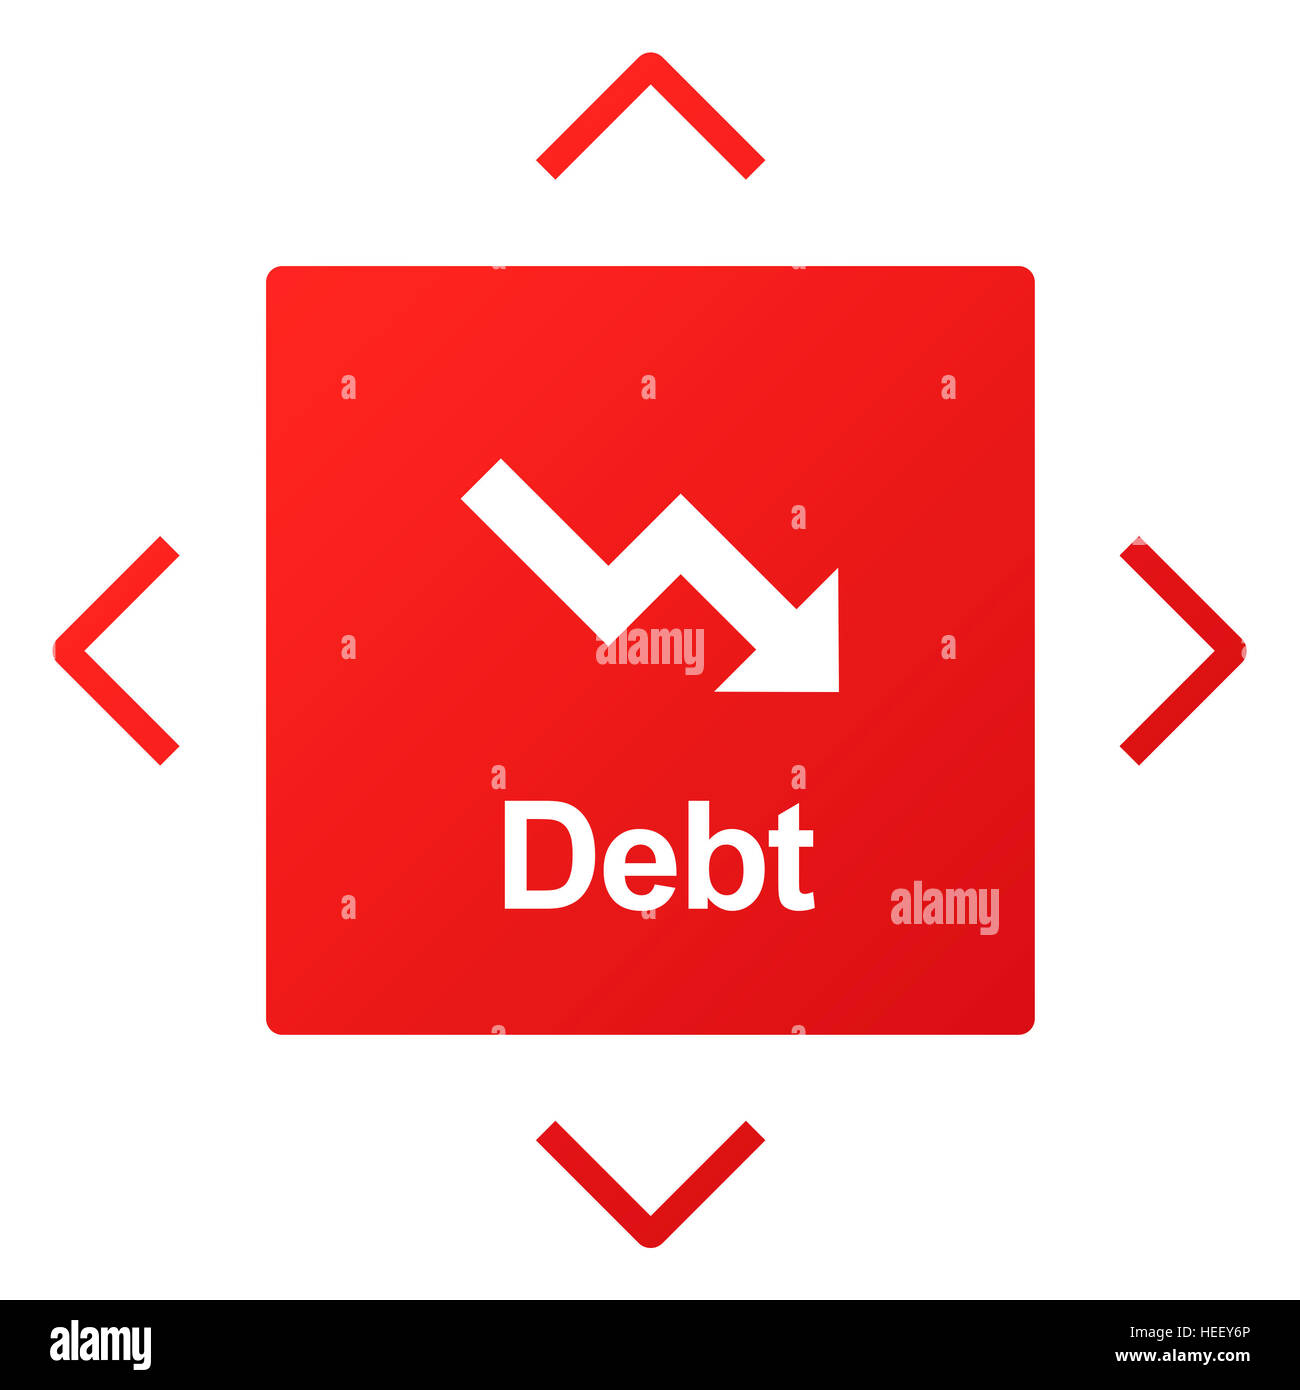 Debt Ridk Difficulty Downfall Concept Stock Photo